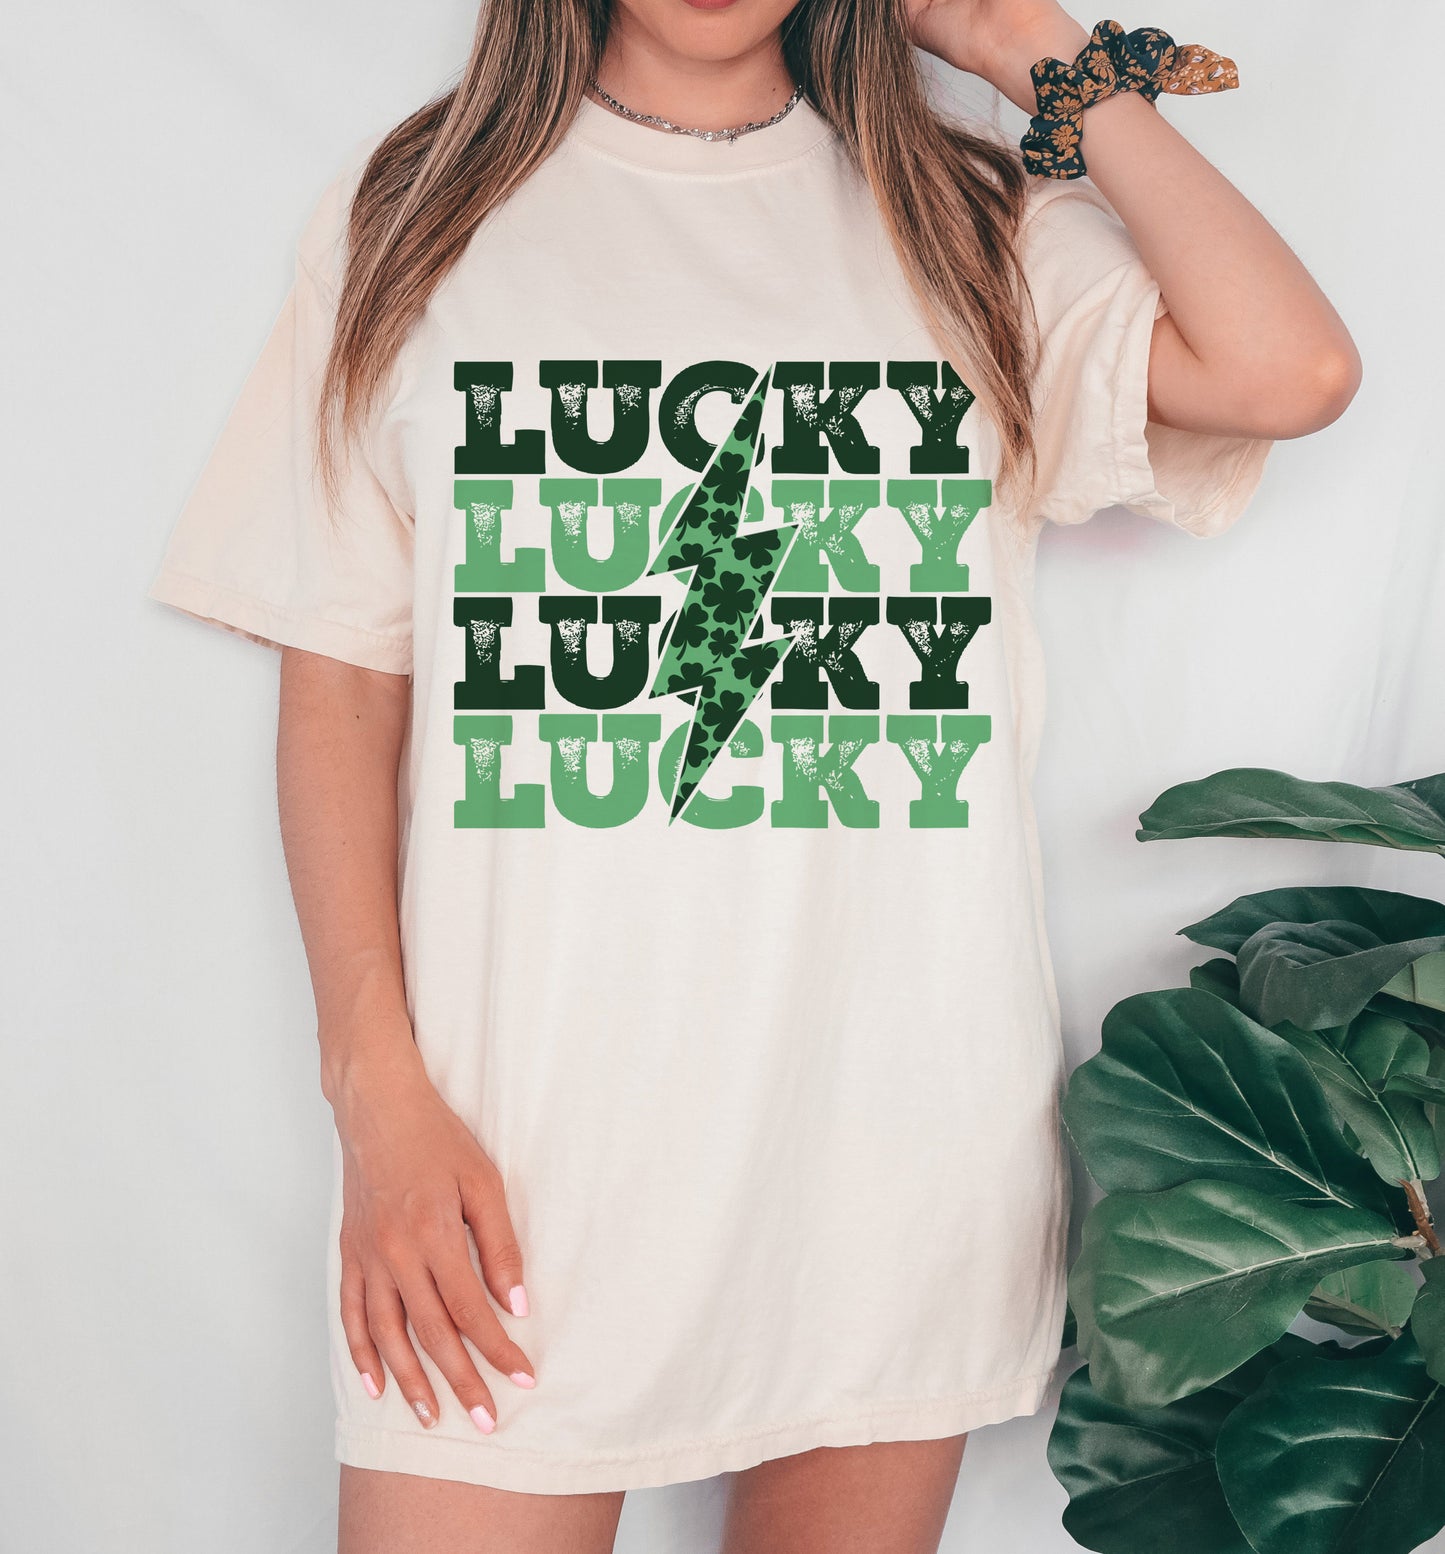 Lightning Lucky Stacked Tee / St. Patrick's Day Shirt / Toddler, Youth, and Adult Sizes Available